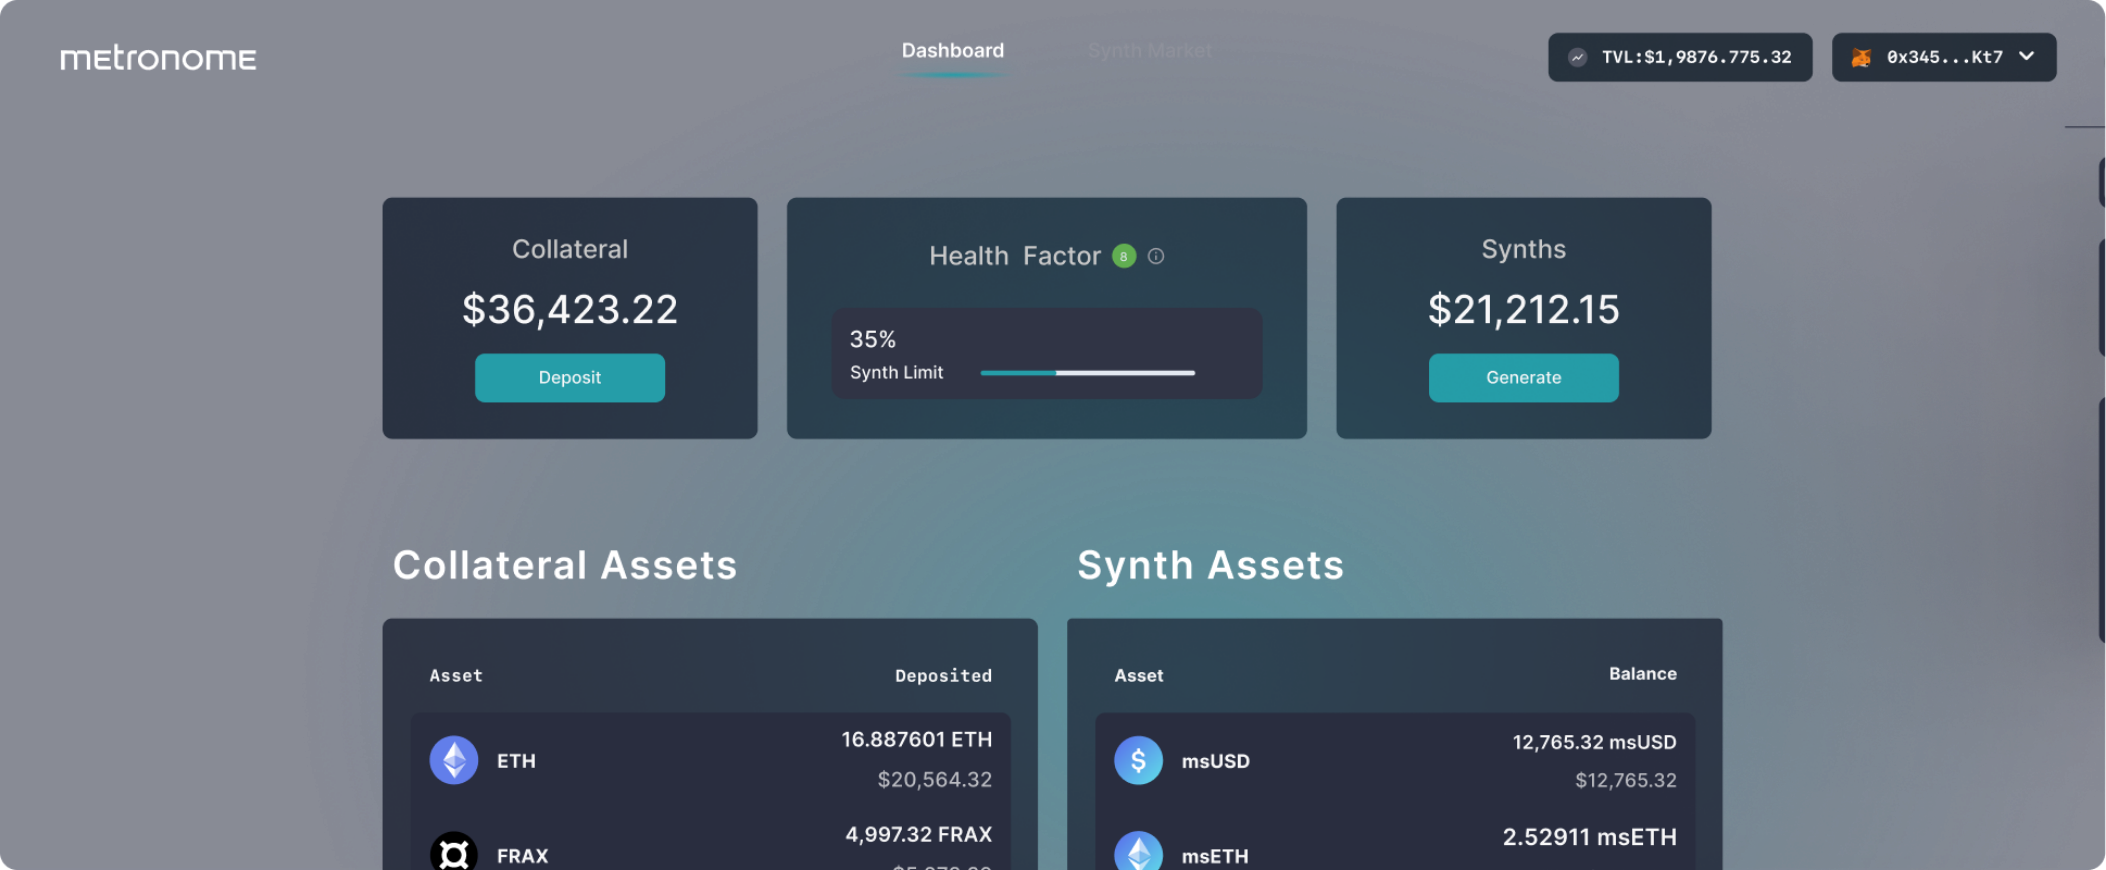 dashboard in the metronome ecosystem